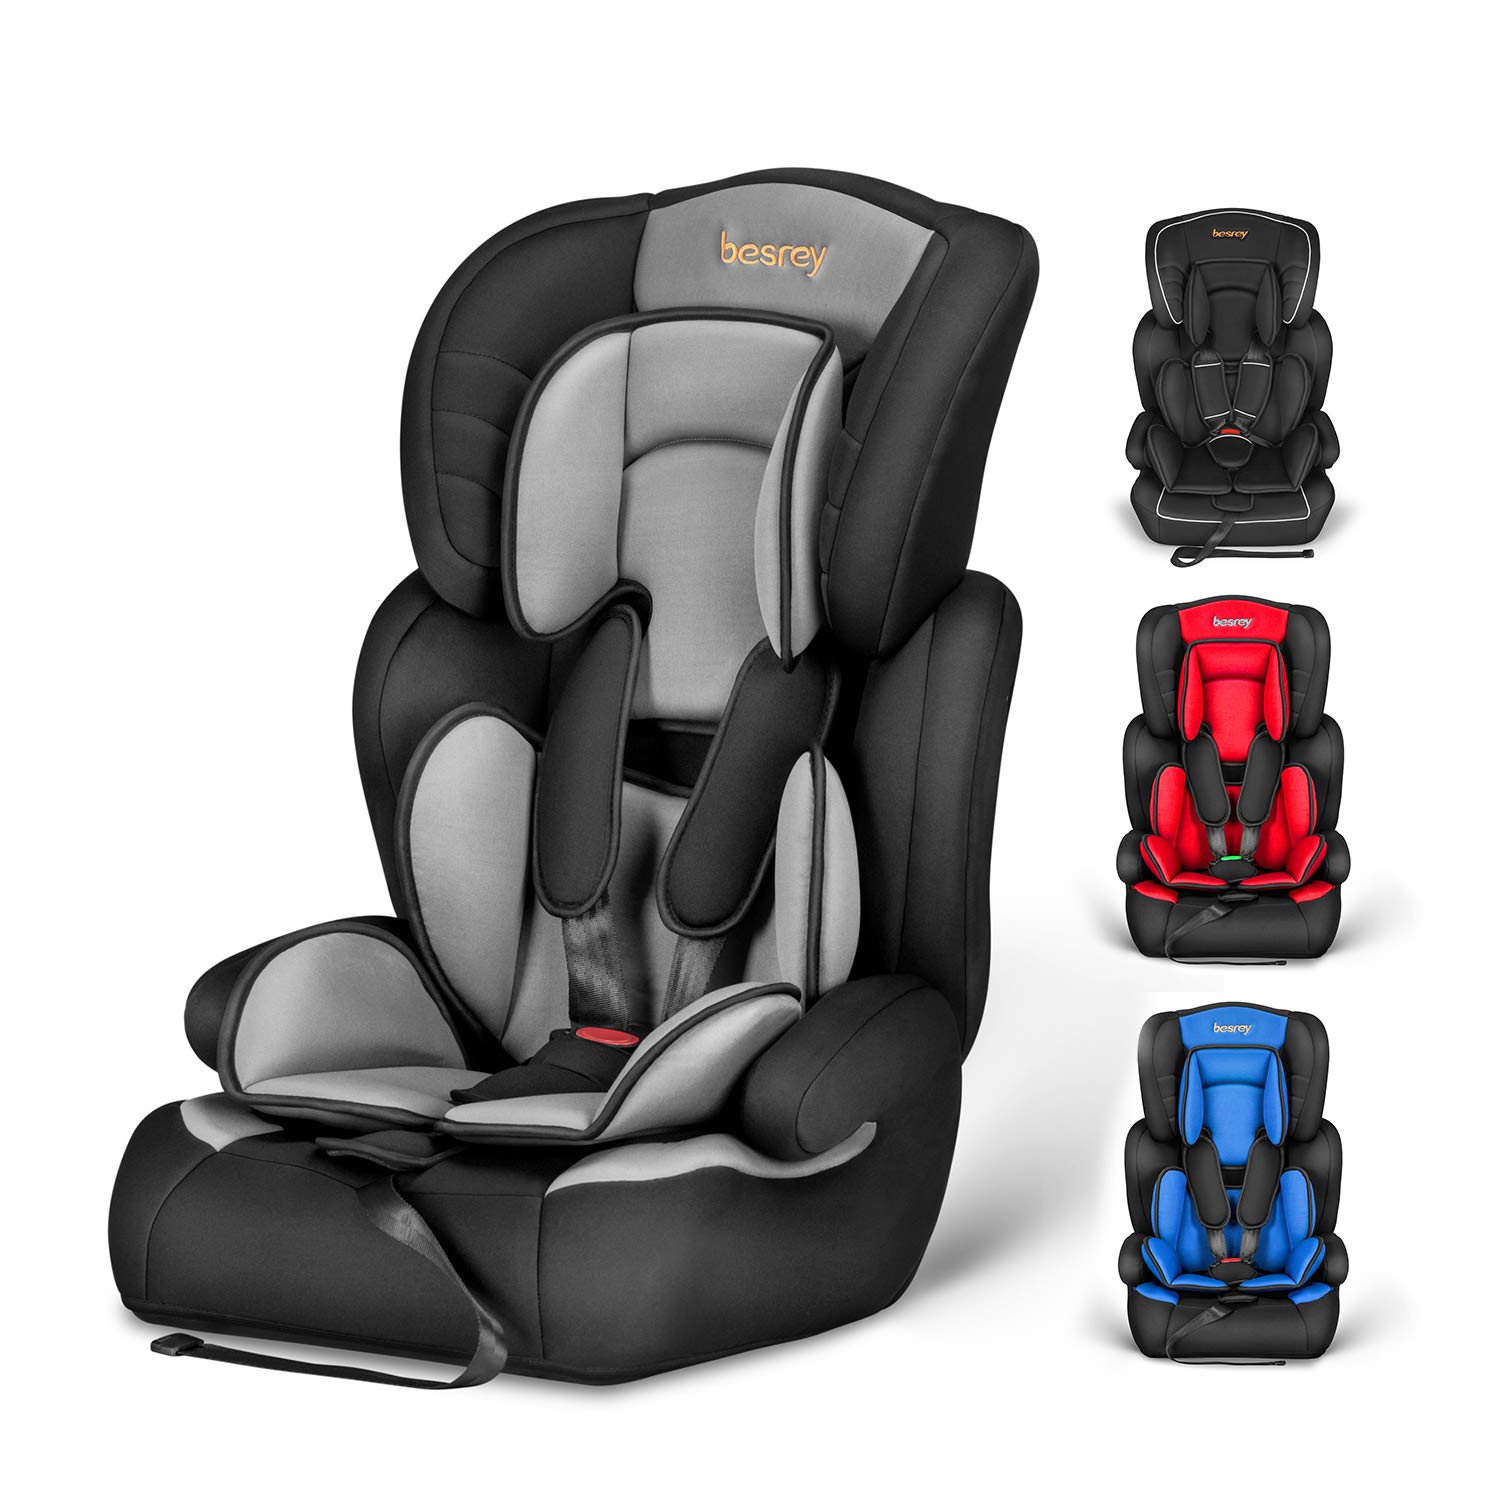 Besrey Child Car Seat Group 1 / 2 / 3 (9 - 36 kg). Adjustable Car seat for children 9 months - 12 years. ECE R44/04 Secured with safety belts, no Isofix. grey